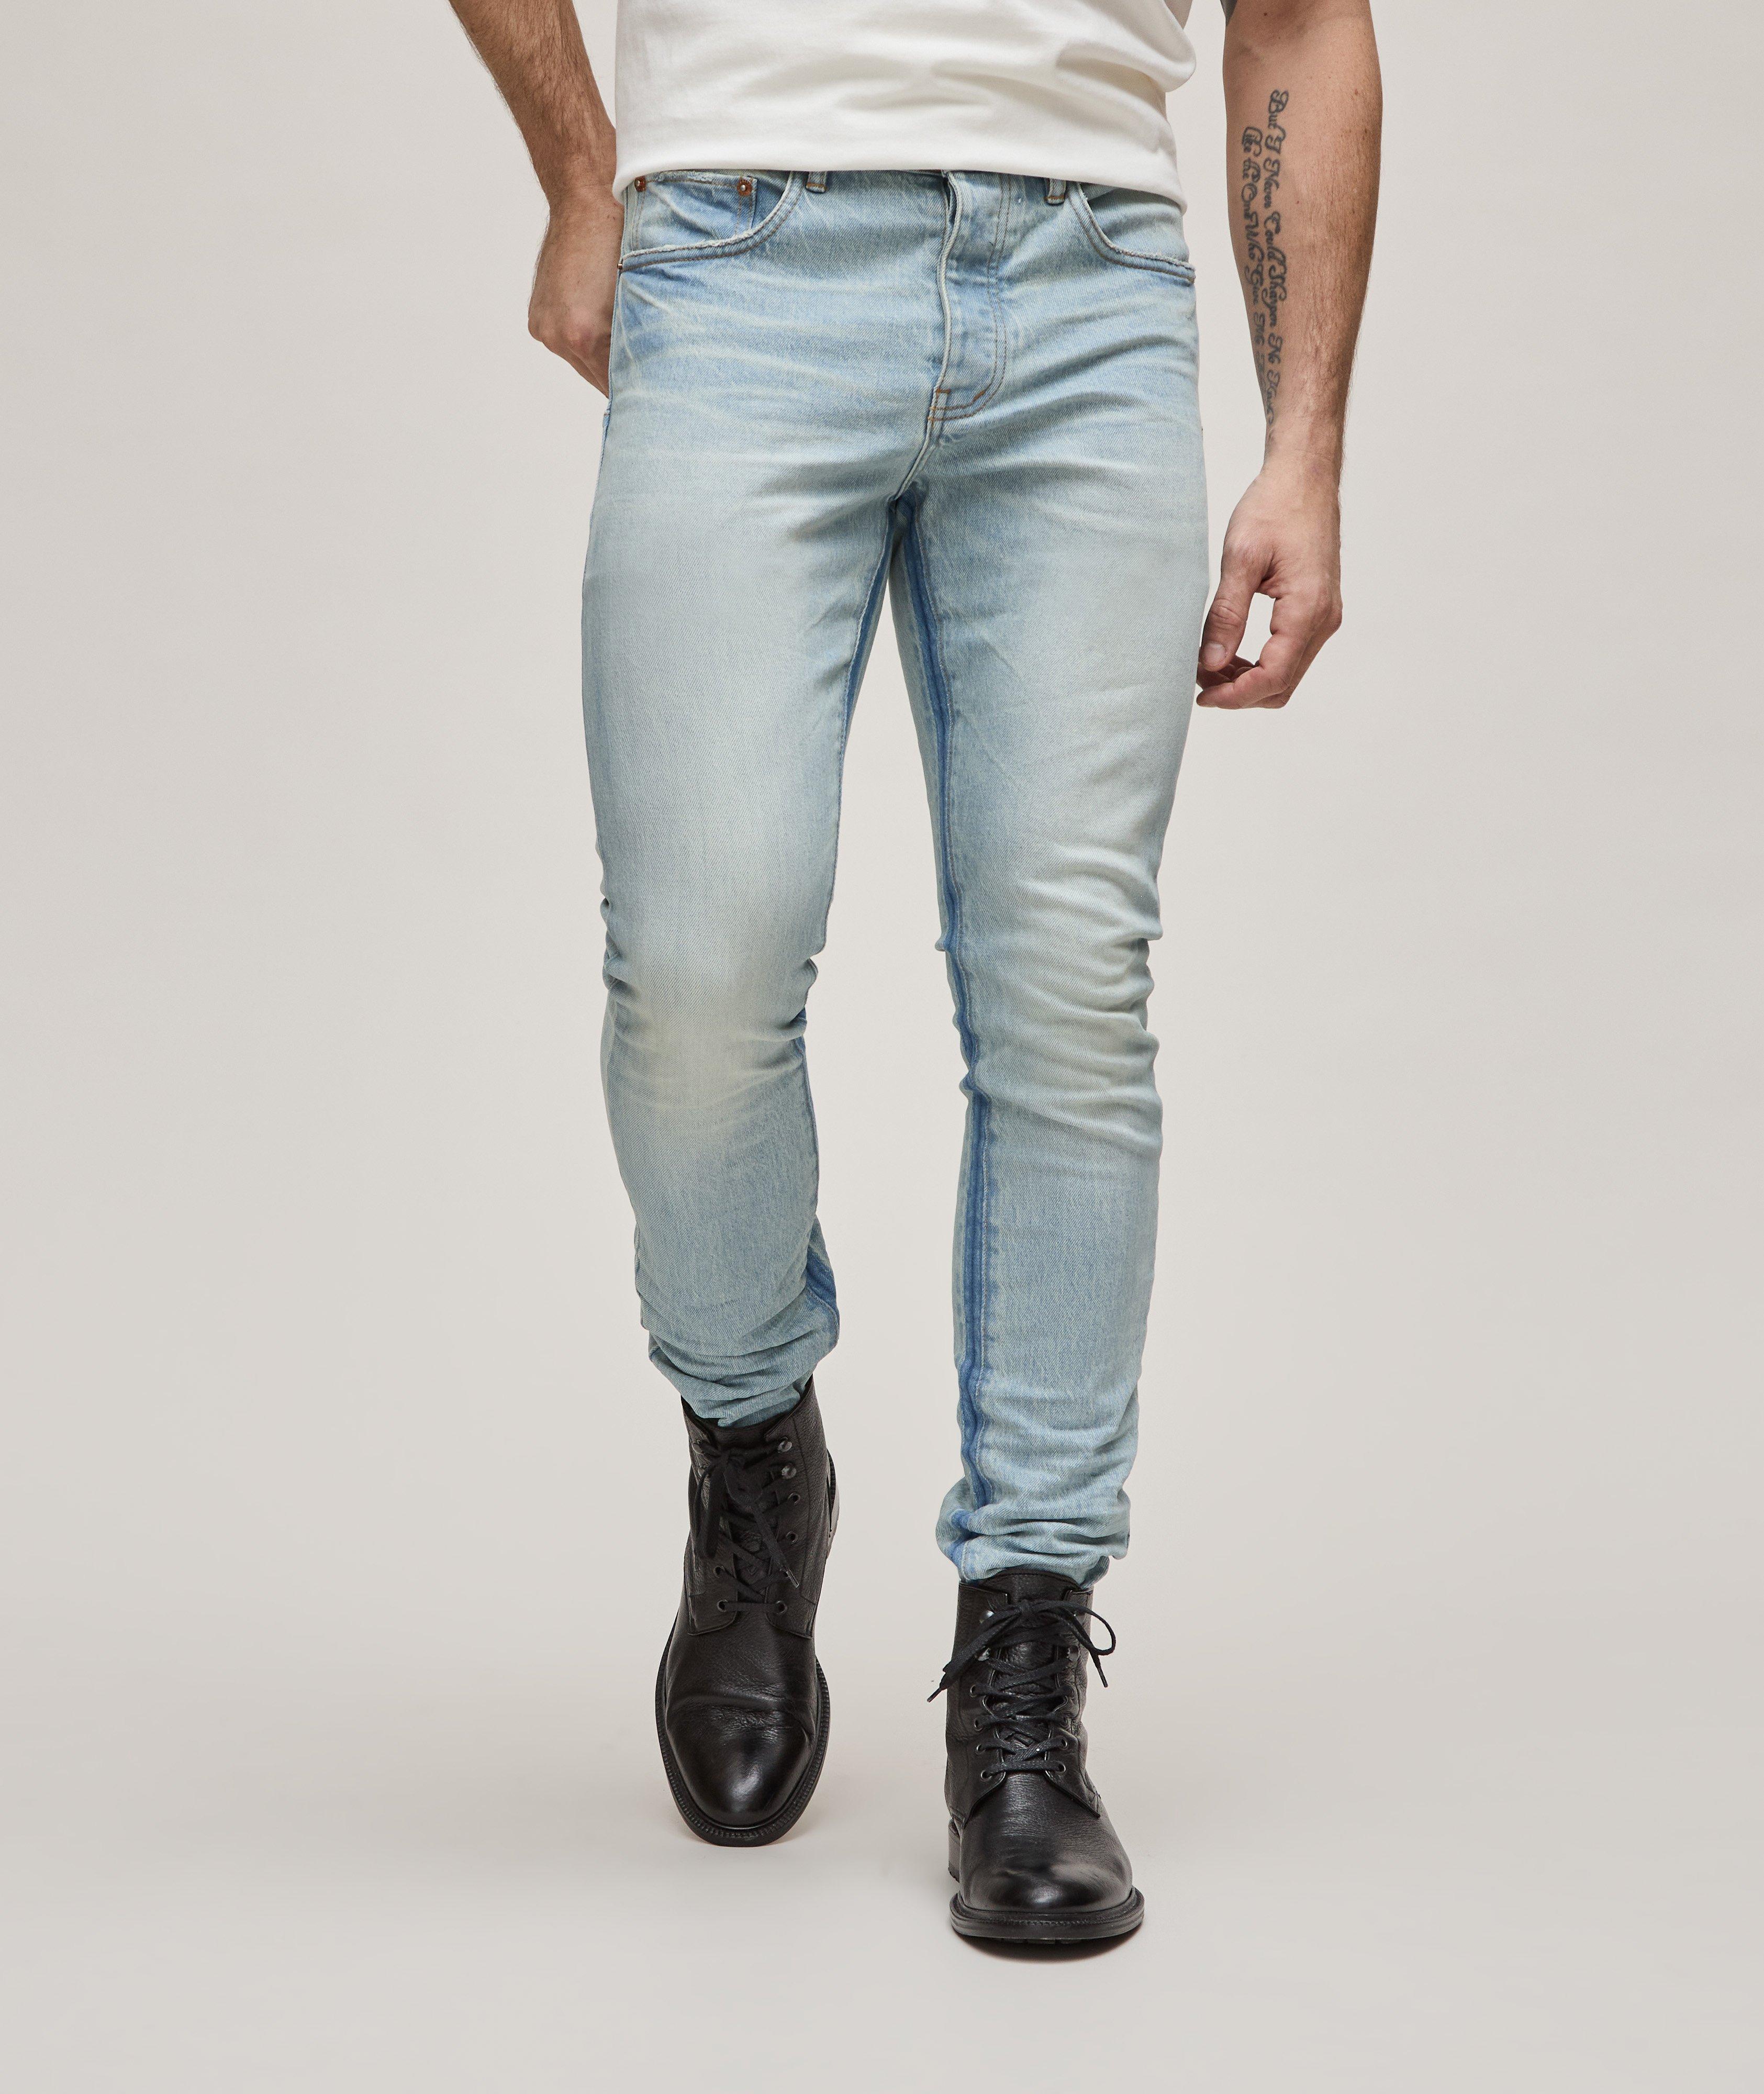 P001 Shadow Inseam Stretch-Cotton Jeans image 2